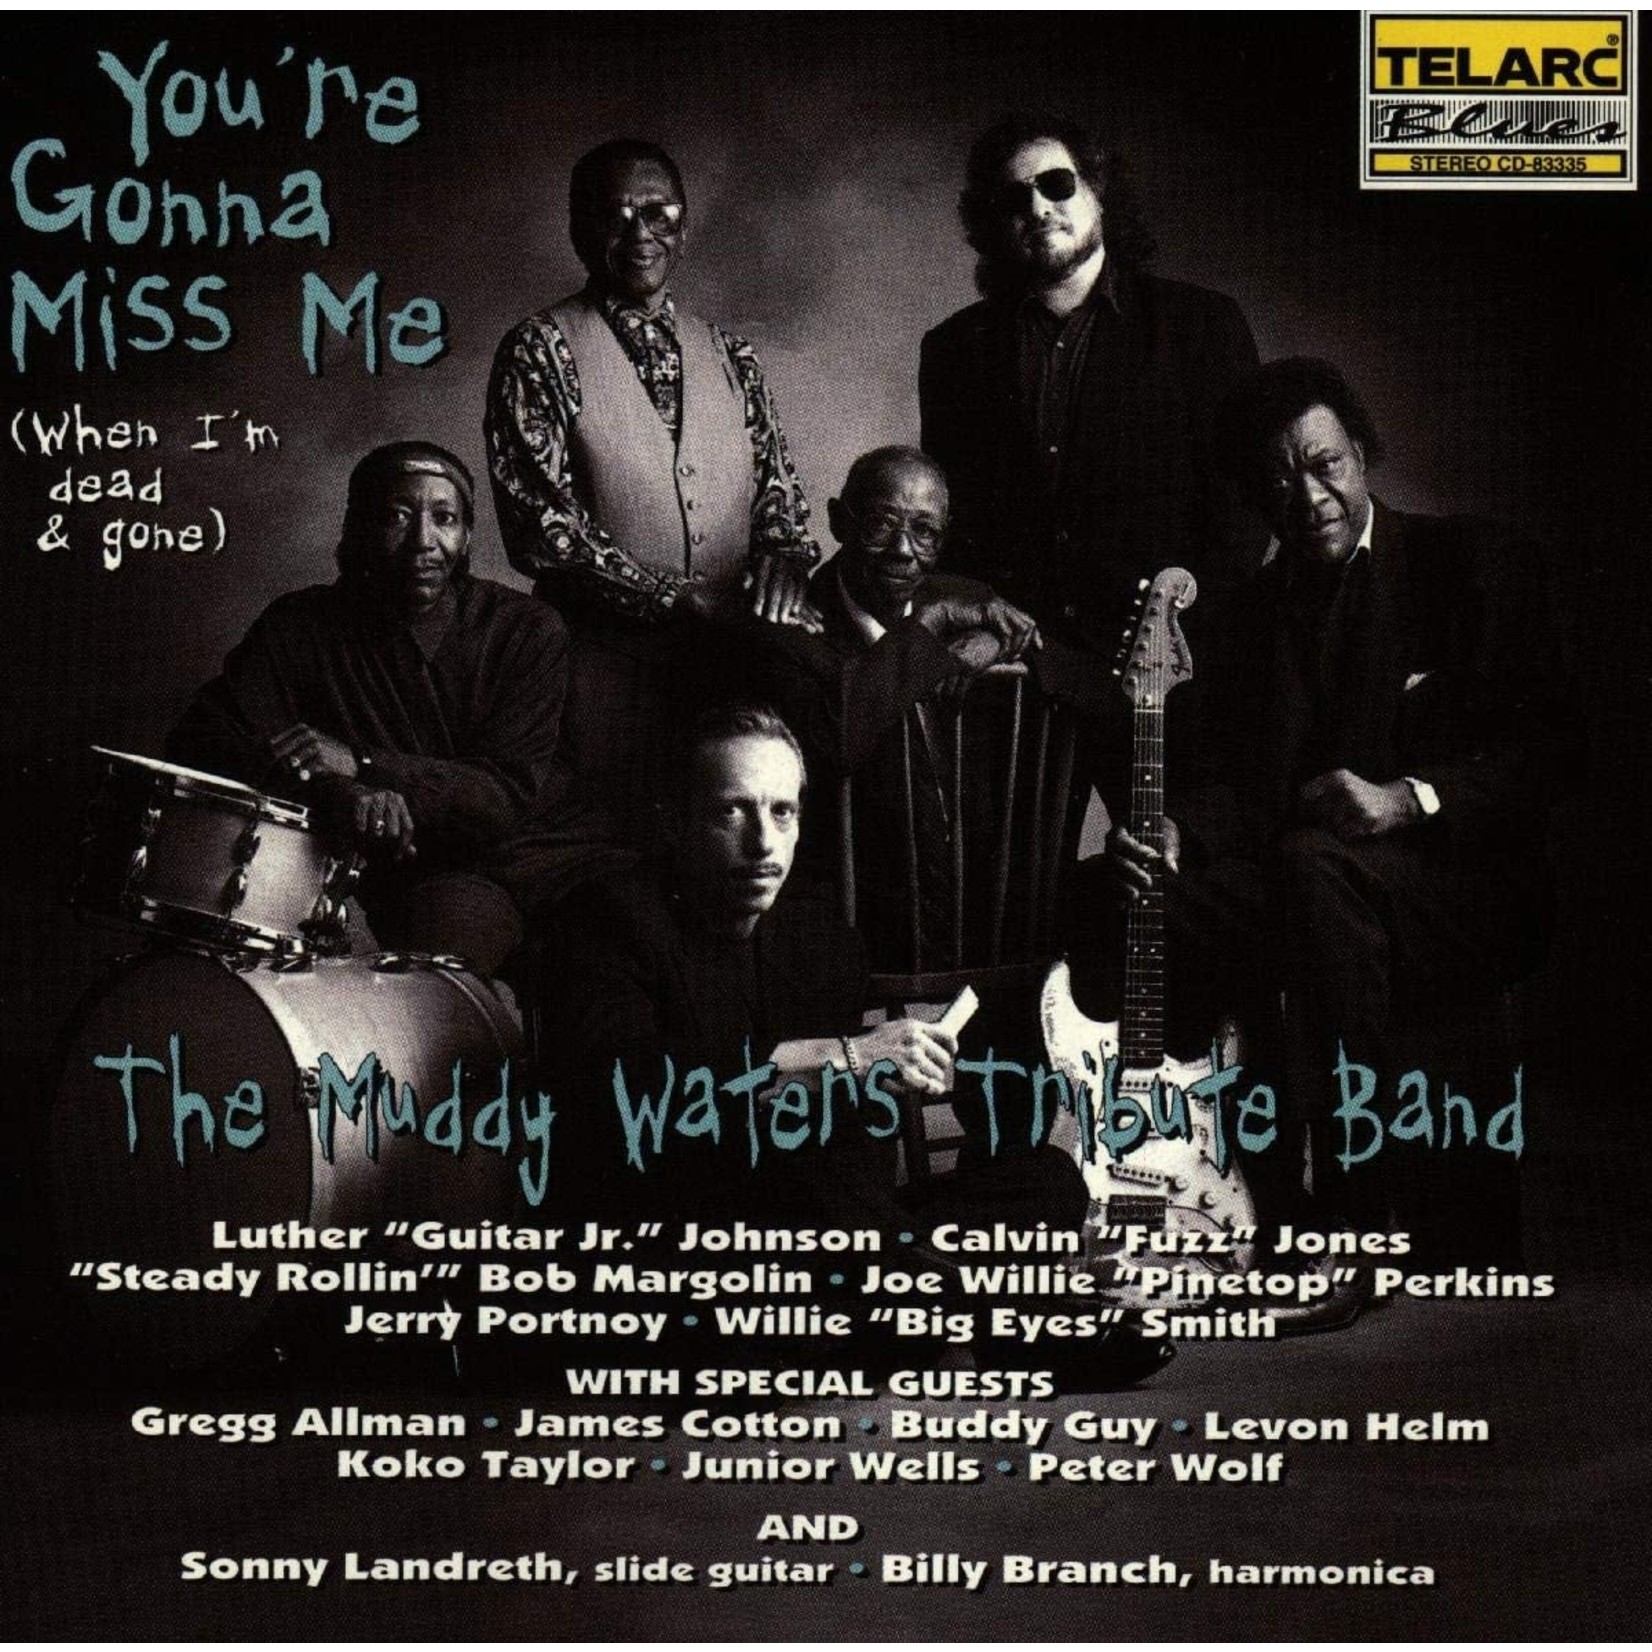 Muddy Waters Tribute Band - You're Gonna Miss Me (When I'm Gone & Dead) [USED CD]